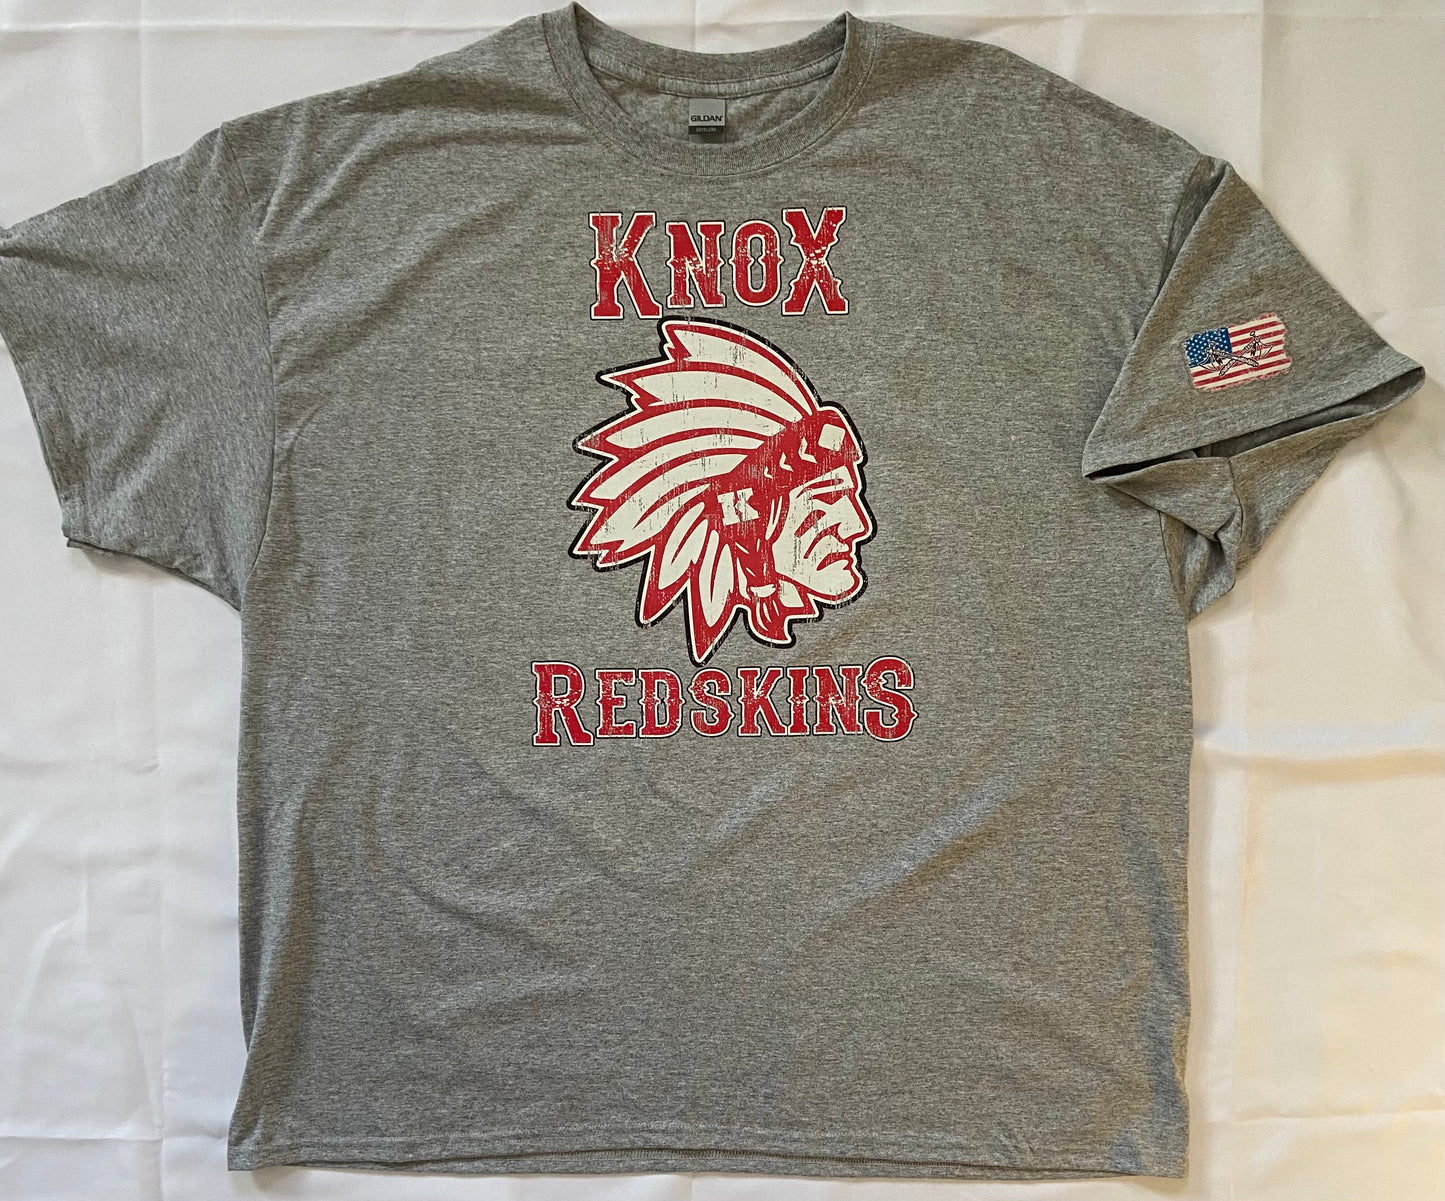 Knox Redskins Logo T-Shirt - Black Gray or White - Adult and Youth Kid's sizes